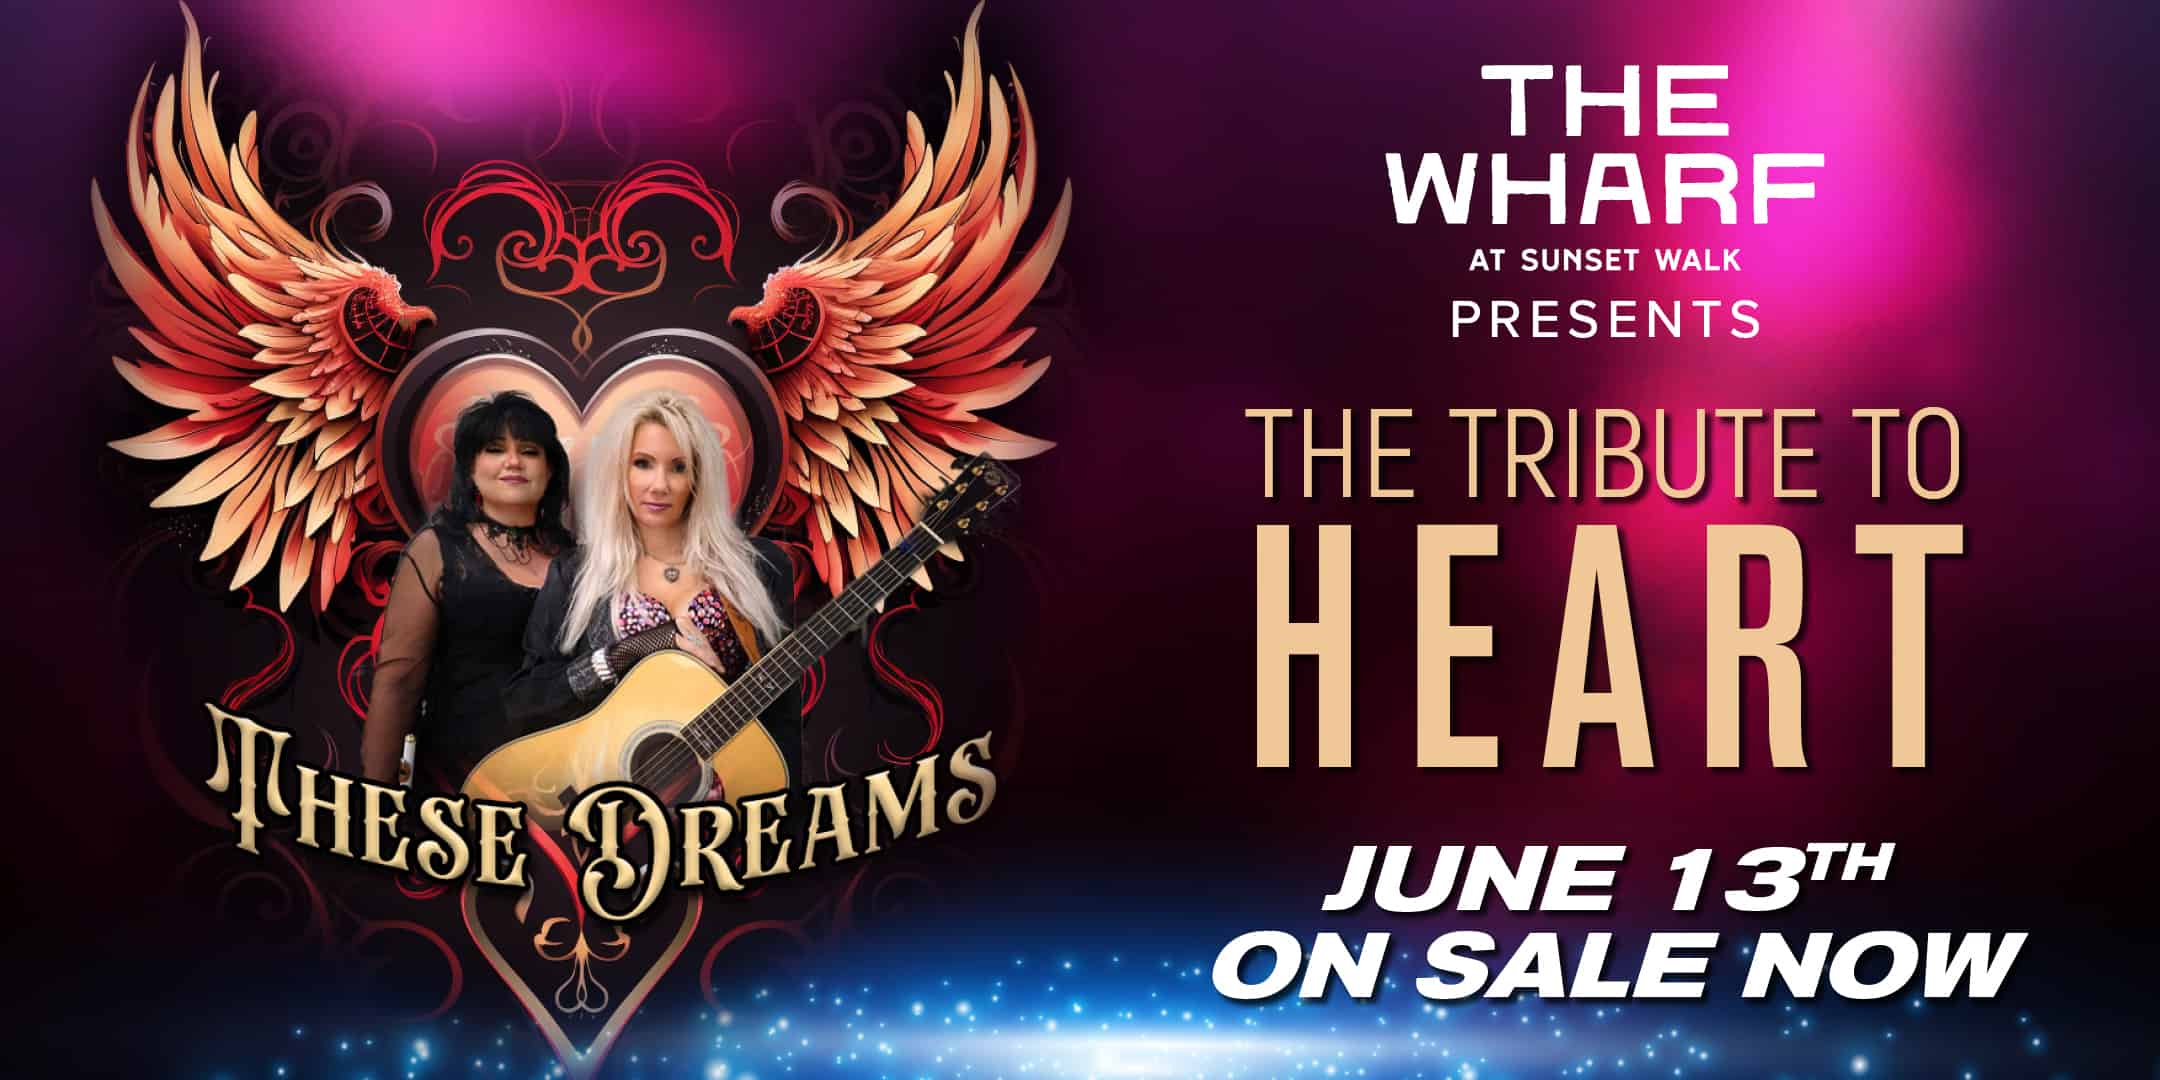 These Dreams: The Tribute to Heart